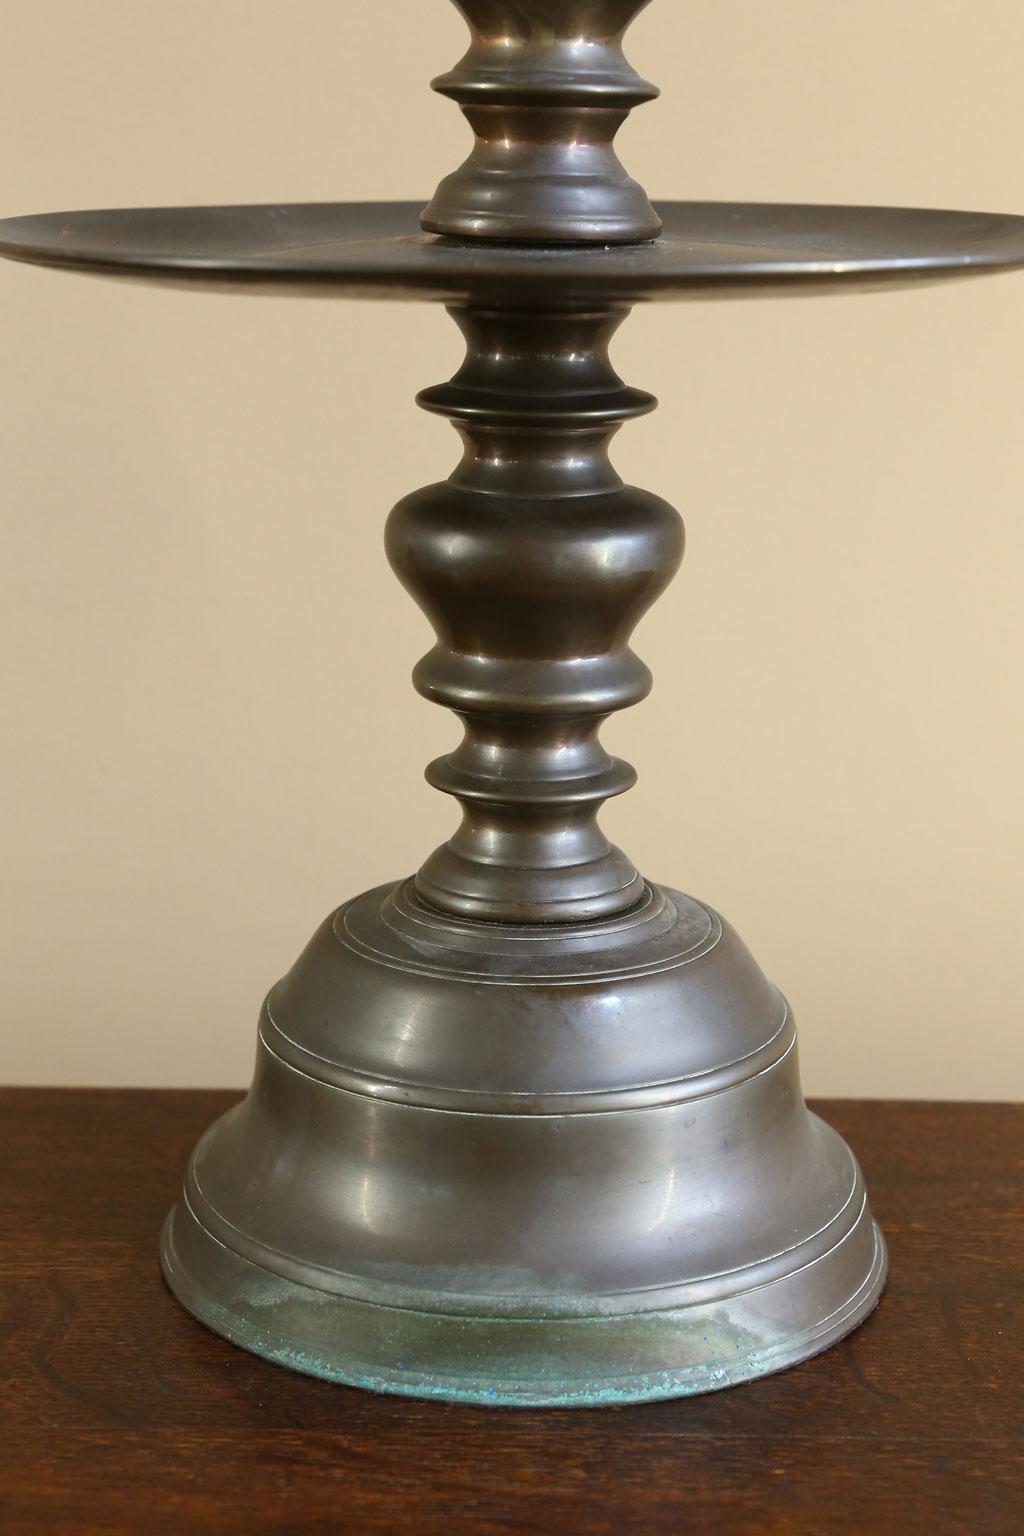 Cast Fabulous, Antique, Classic Bronze Dutch-Style Table Lamp with Charming Tray For Sale